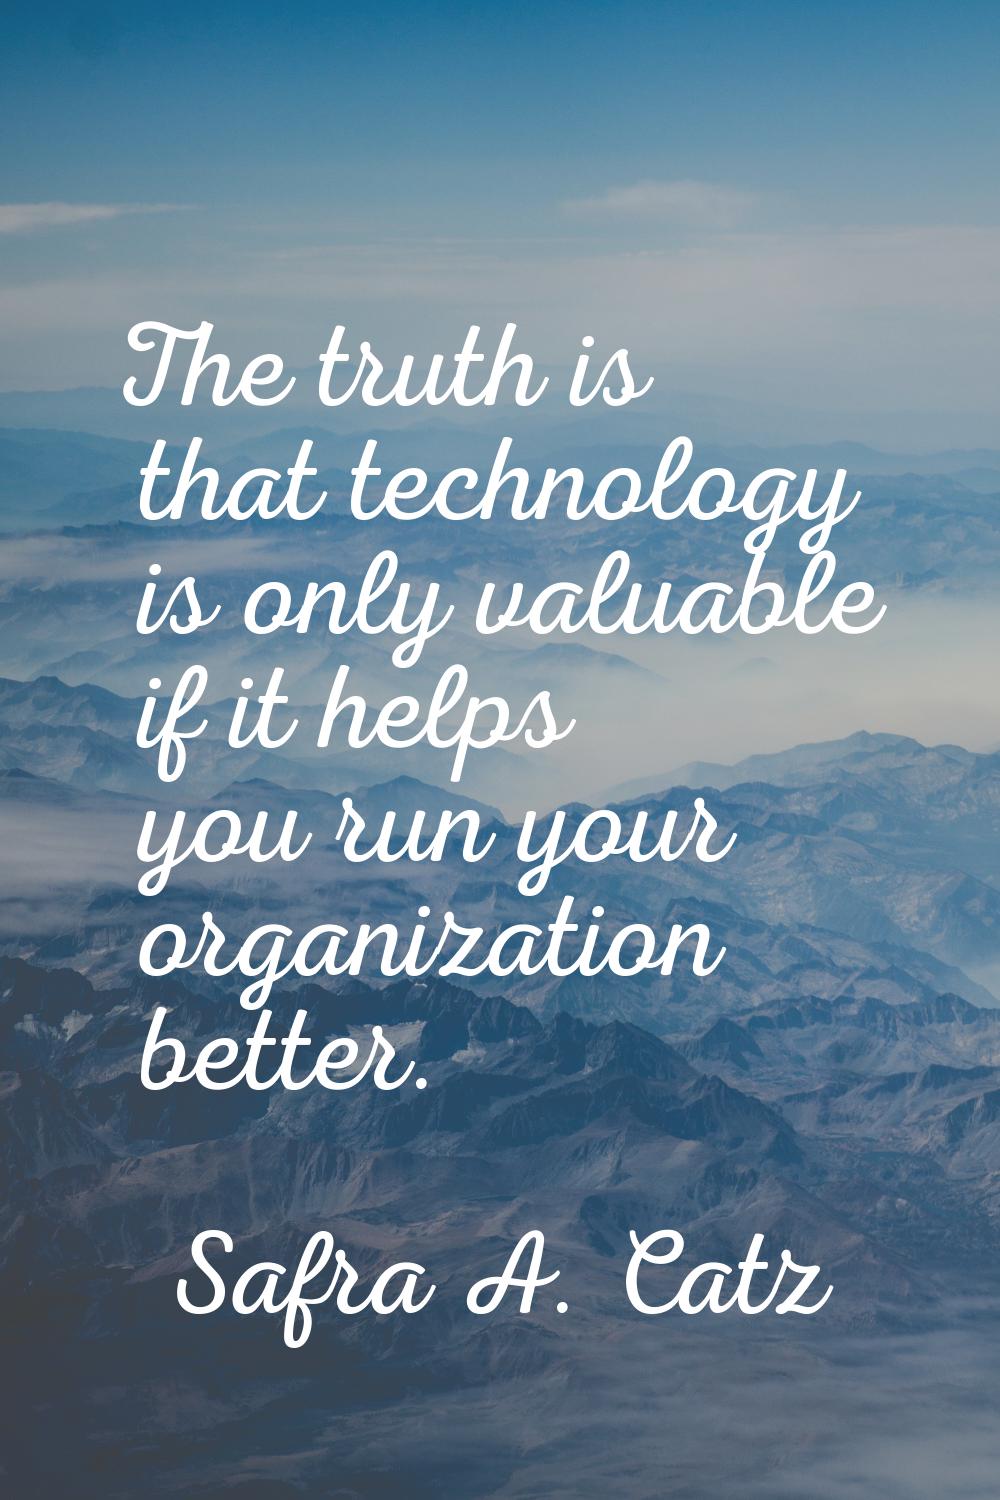 The truth is that technology is only valuable if it helps you run your organization better.